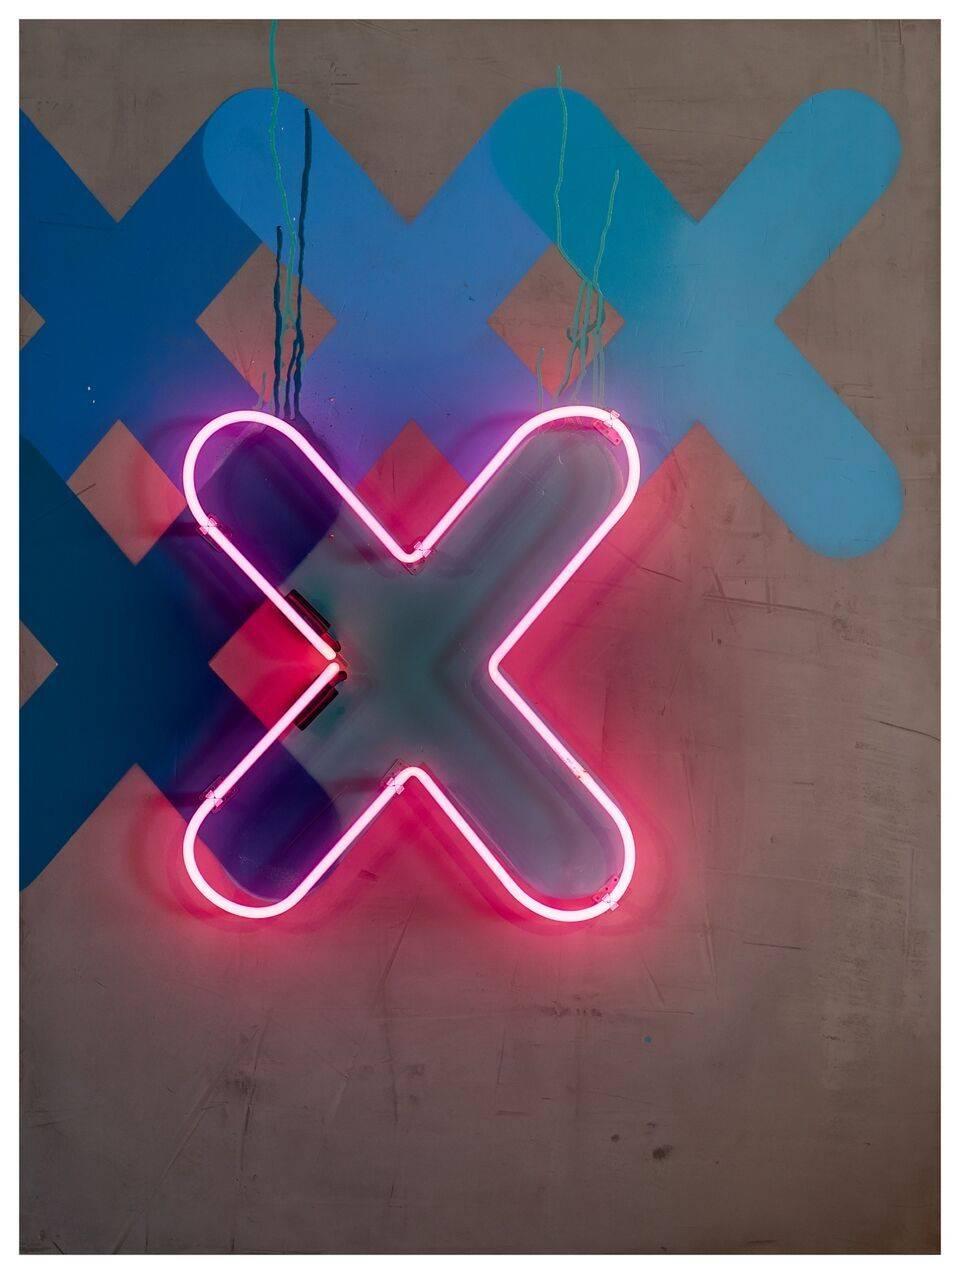 XXX - Original Graffiti Painting - Contemporary - Neon on Wood - Mixed Media Art by Karlos Marquez